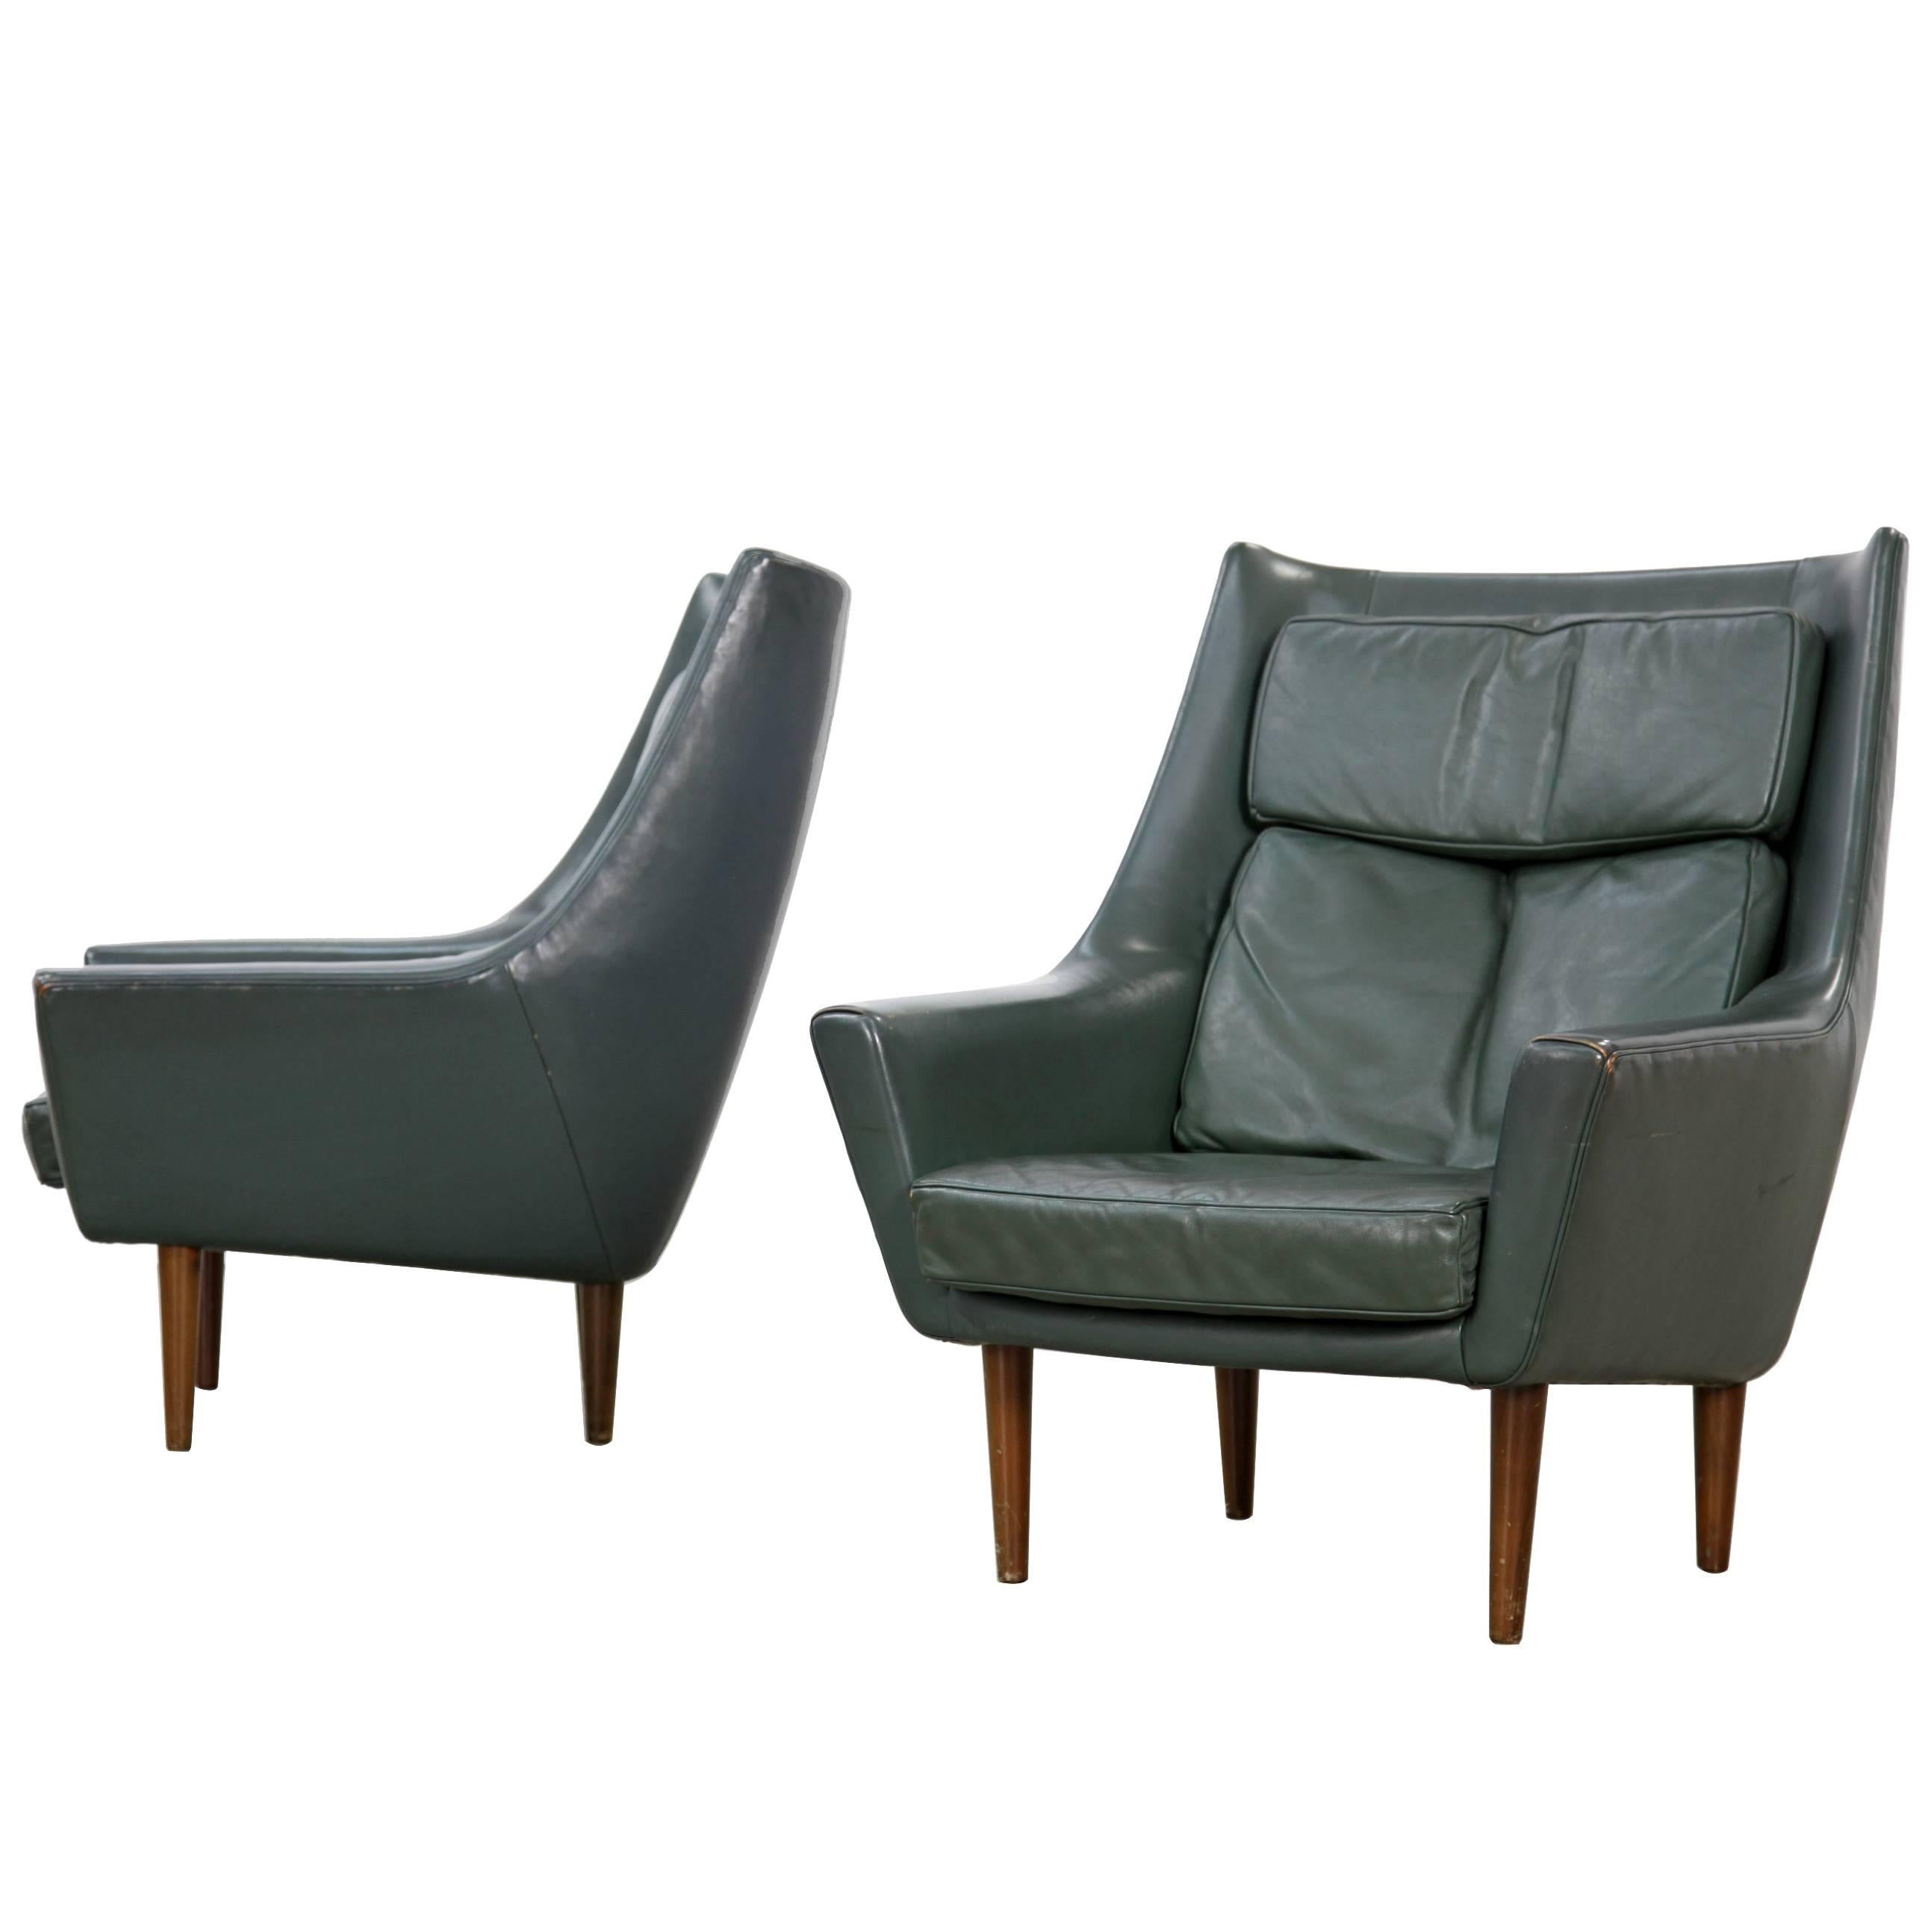 Two Danish Lounge Chairs Hans Olsen Attributed with Dark-Green Original Leather For Sale